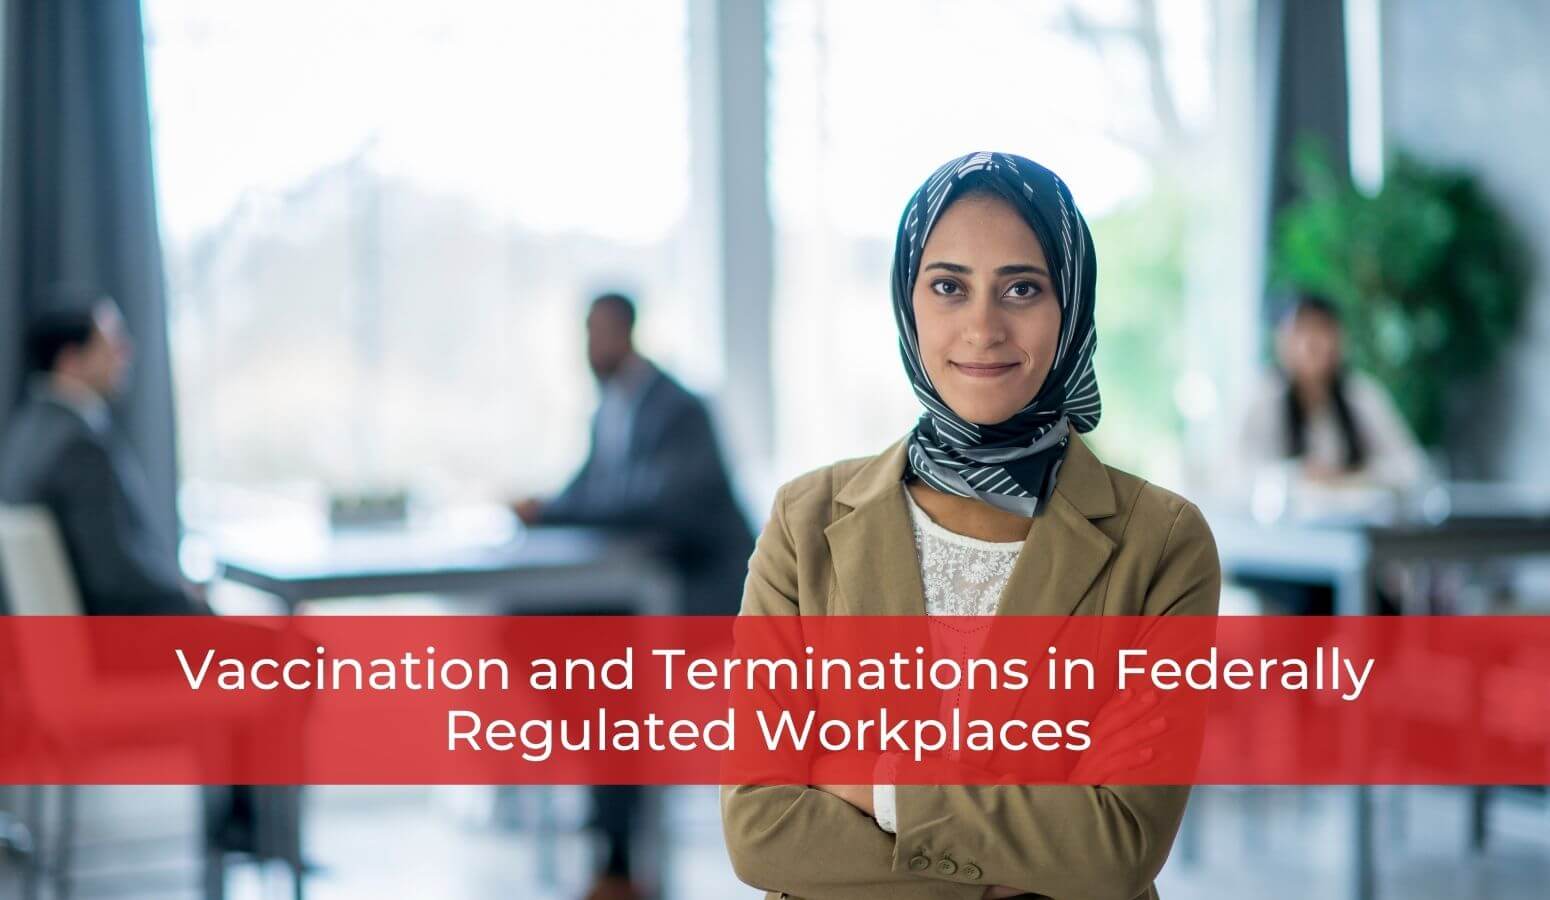 Featured image for “Vaccination and Terminations in Federally Regulated Workplaces”